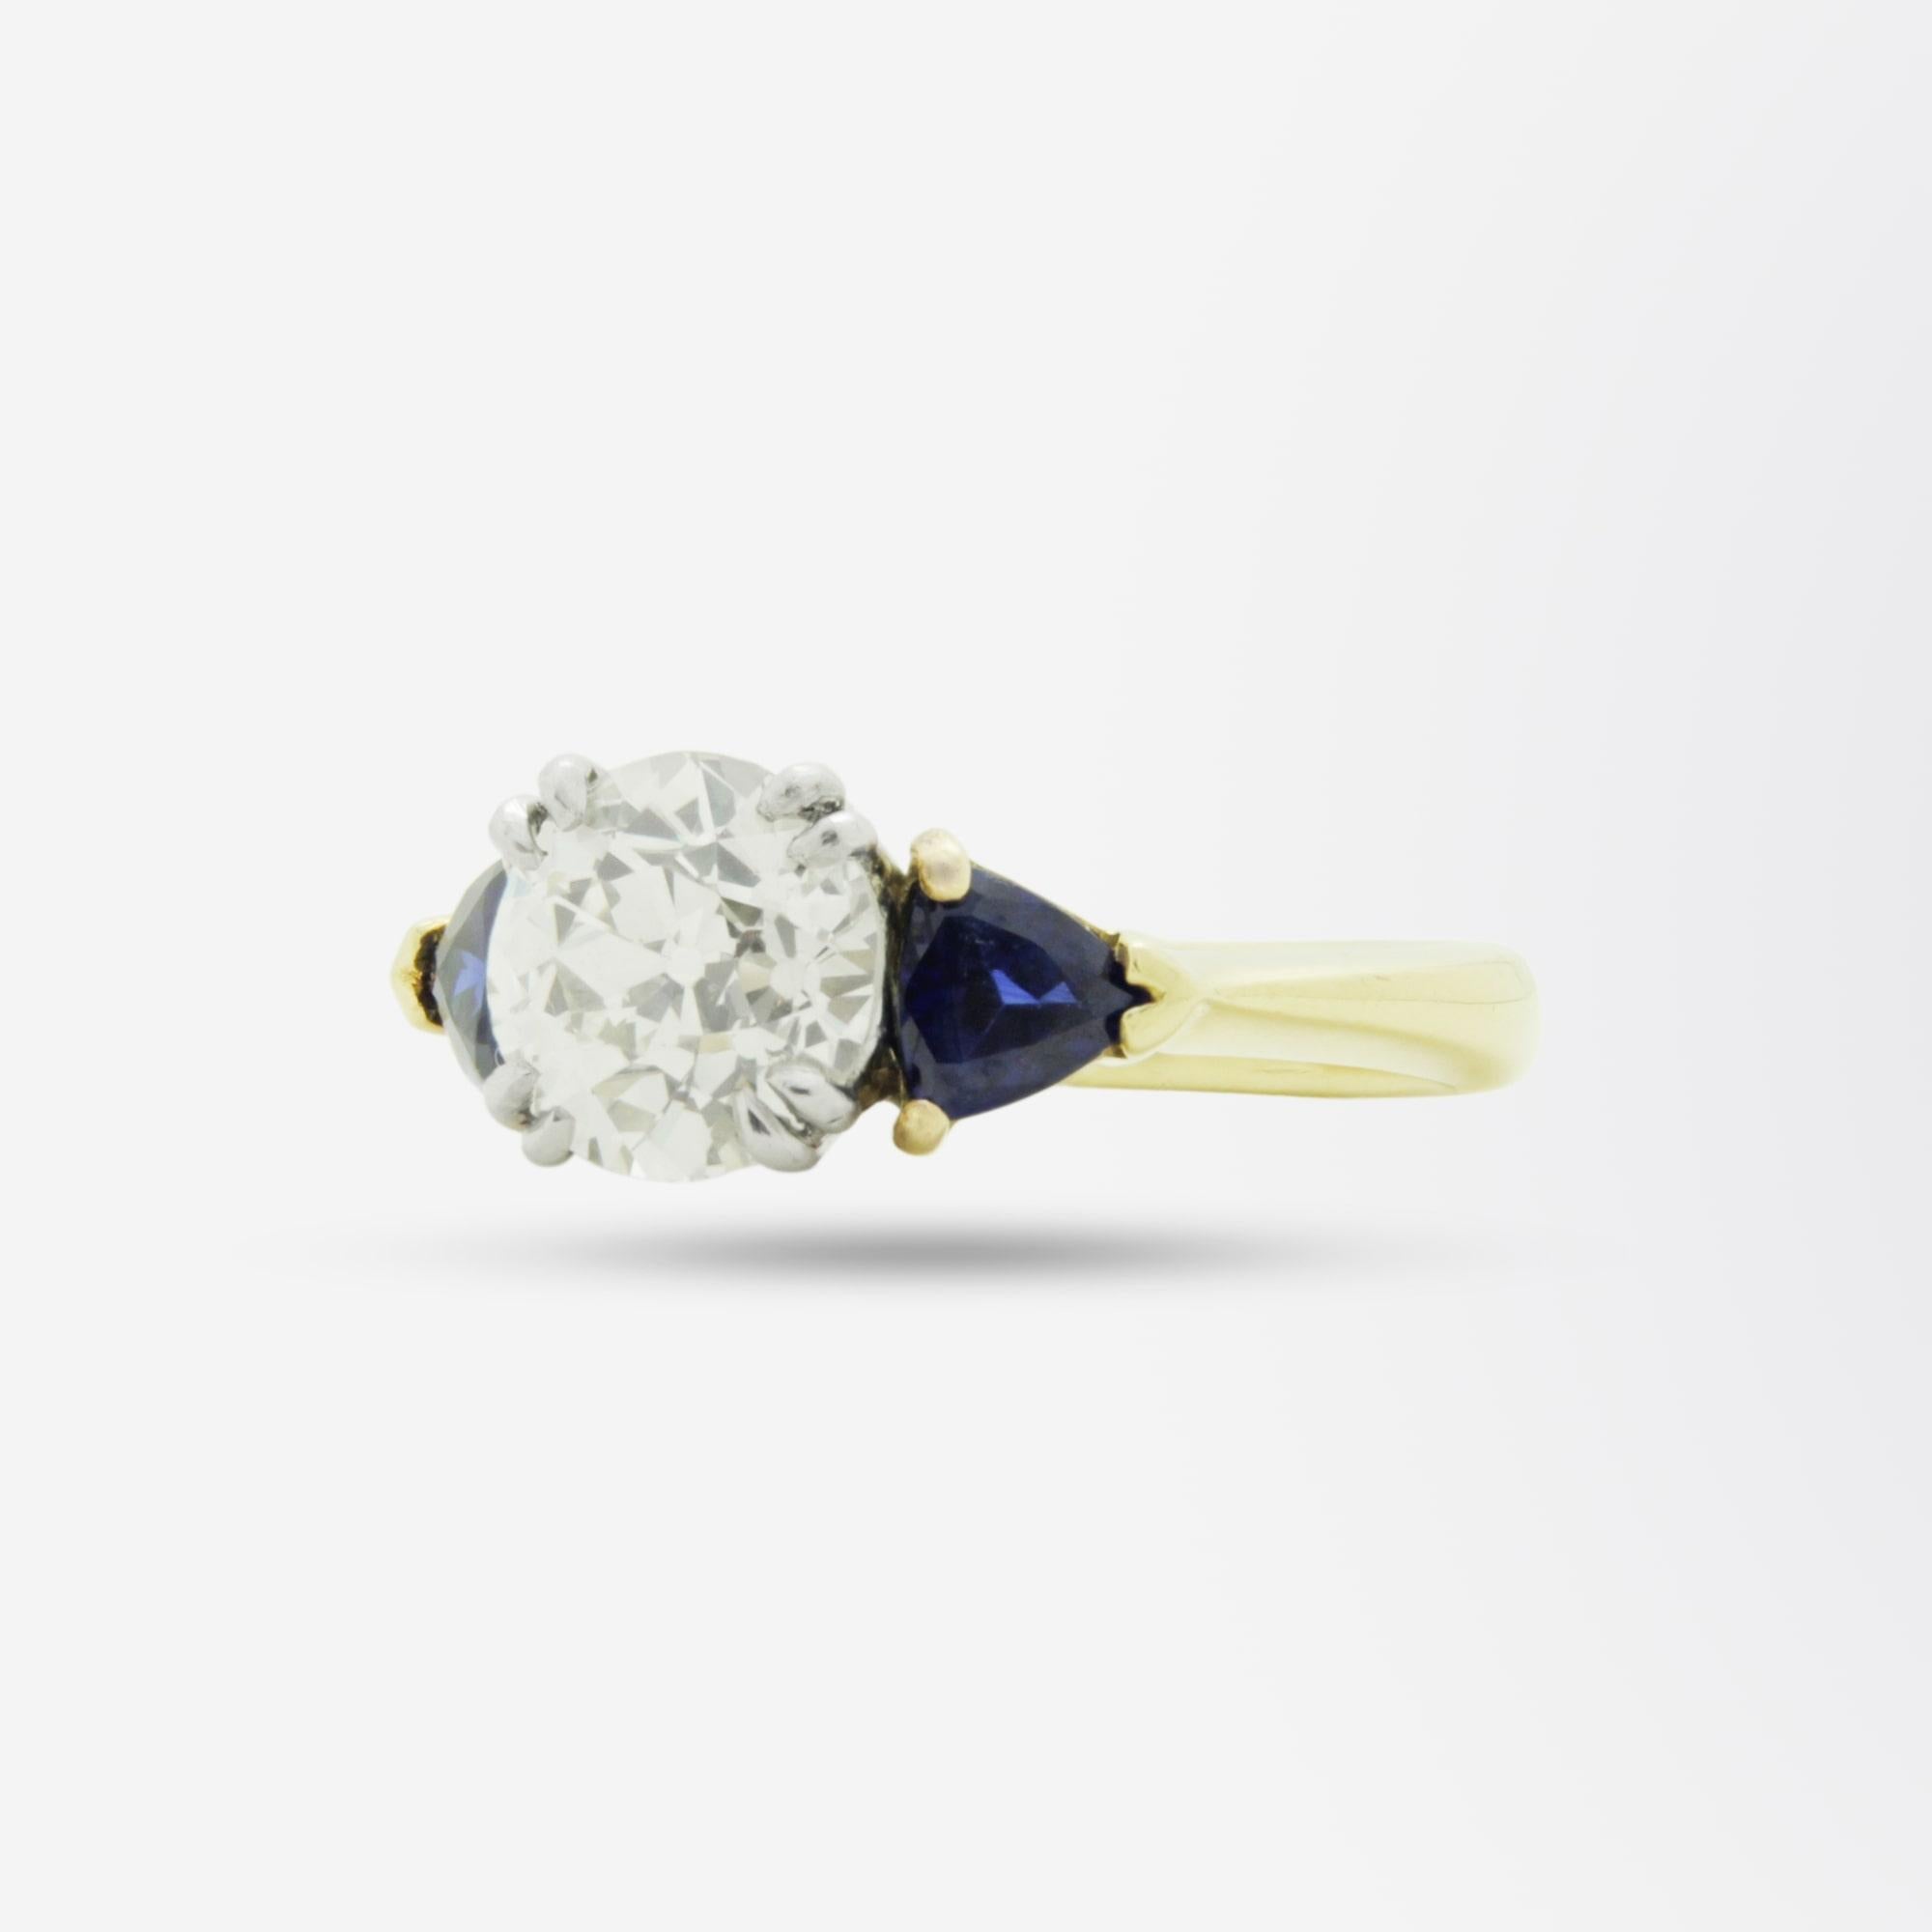 An 18 karat gold, diamond, and sapphire ring featuring a central old European cut diamond weighing 2.15 carat. The diamond is flanked by a pair of trillion cut sapphires, totalling 1 carat, which add to the beauty of this simple, yet elegant ring.